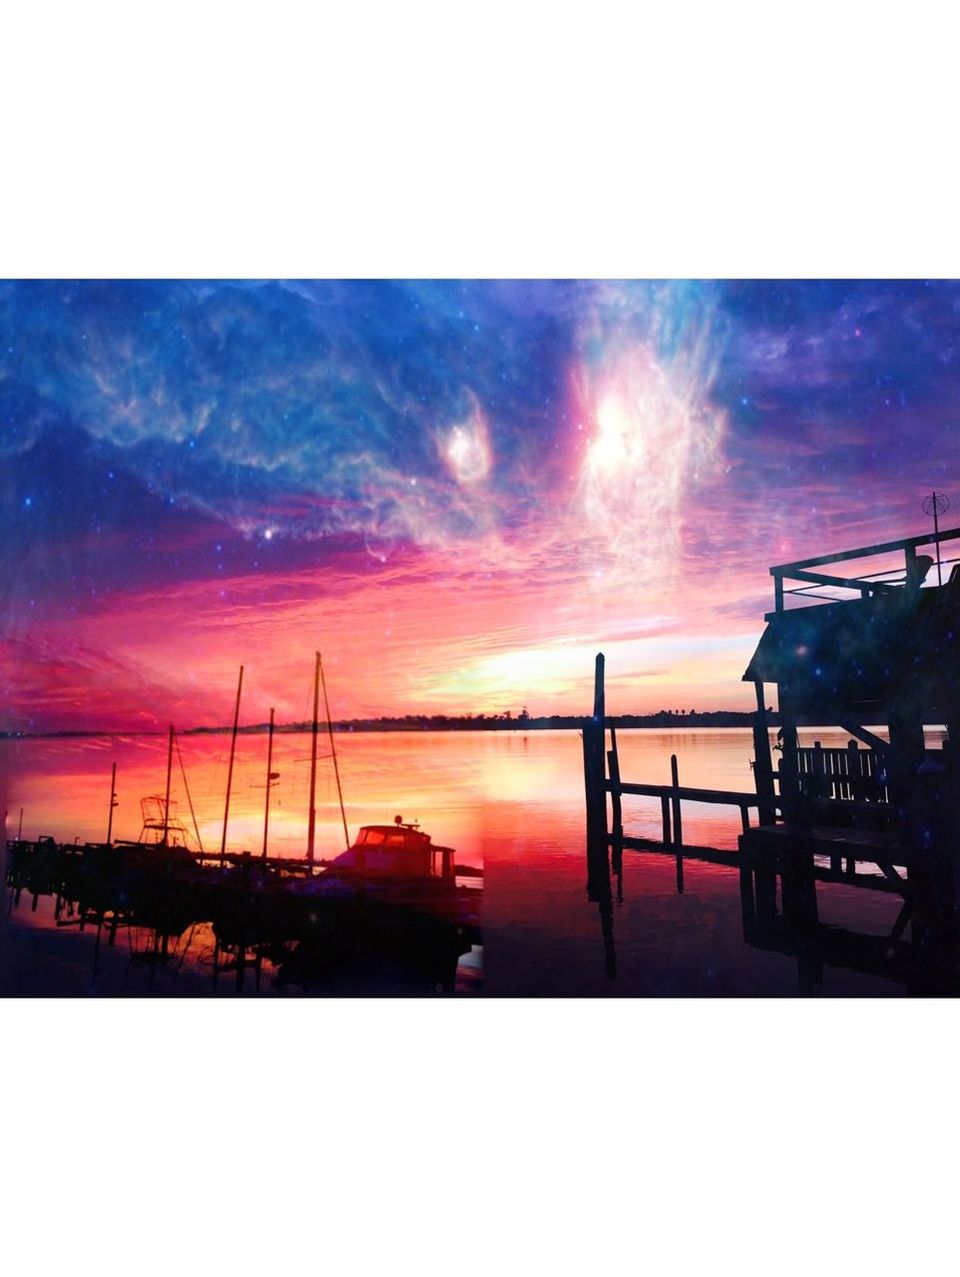 Digital composite image of boats moored in lake during sunset